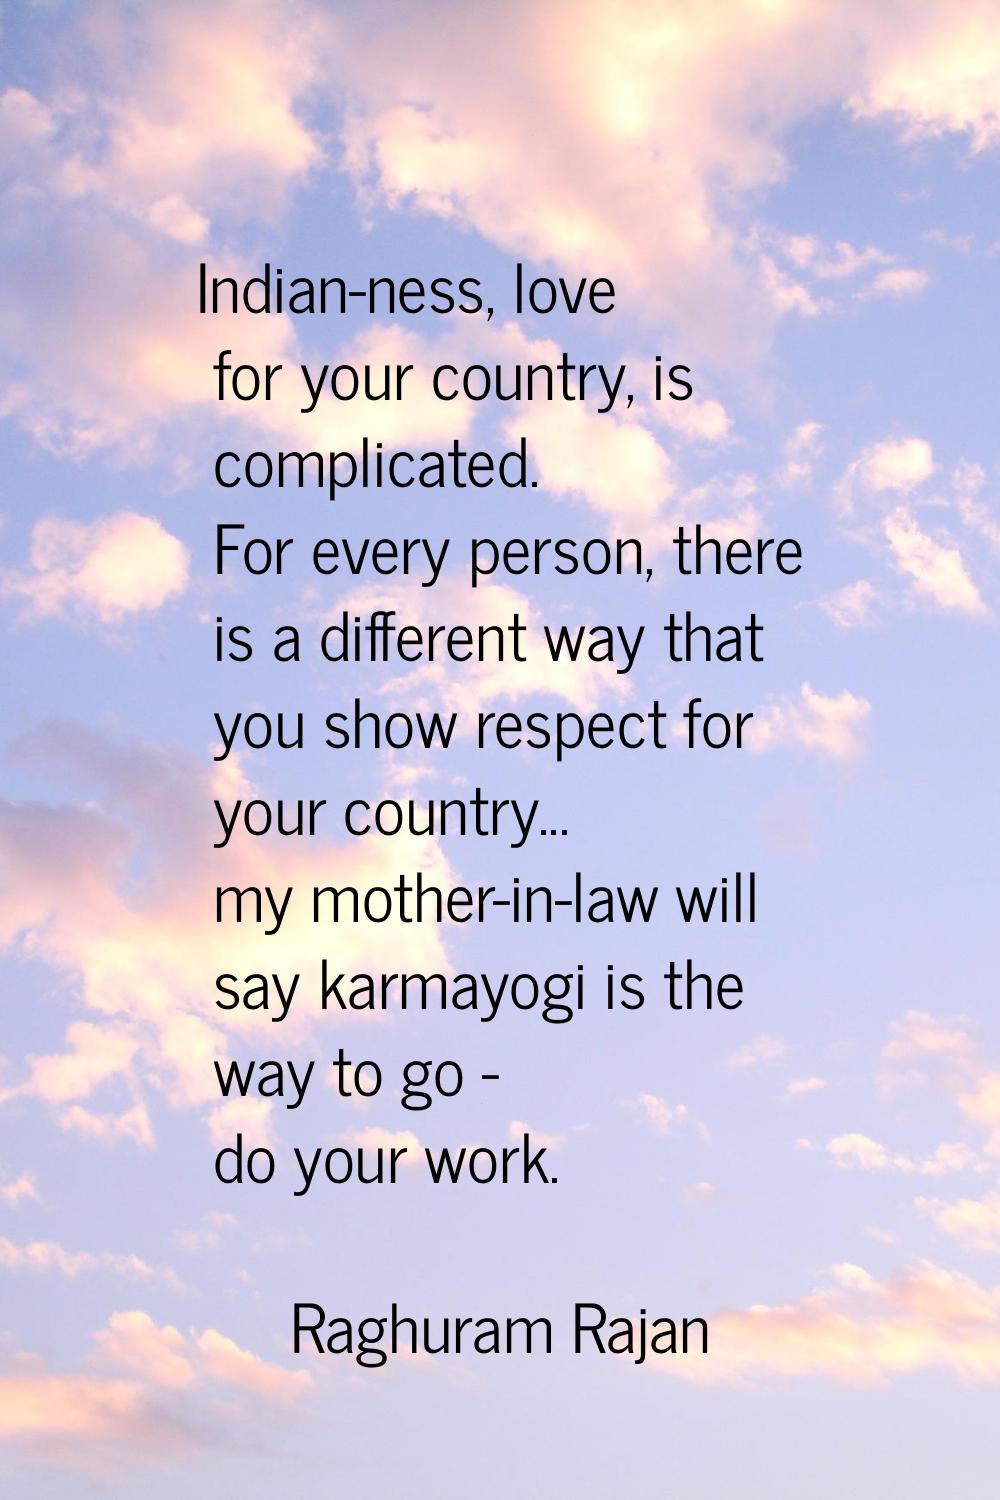 Indian-ness, love for your country, is complicated. For every person, there is a different way that